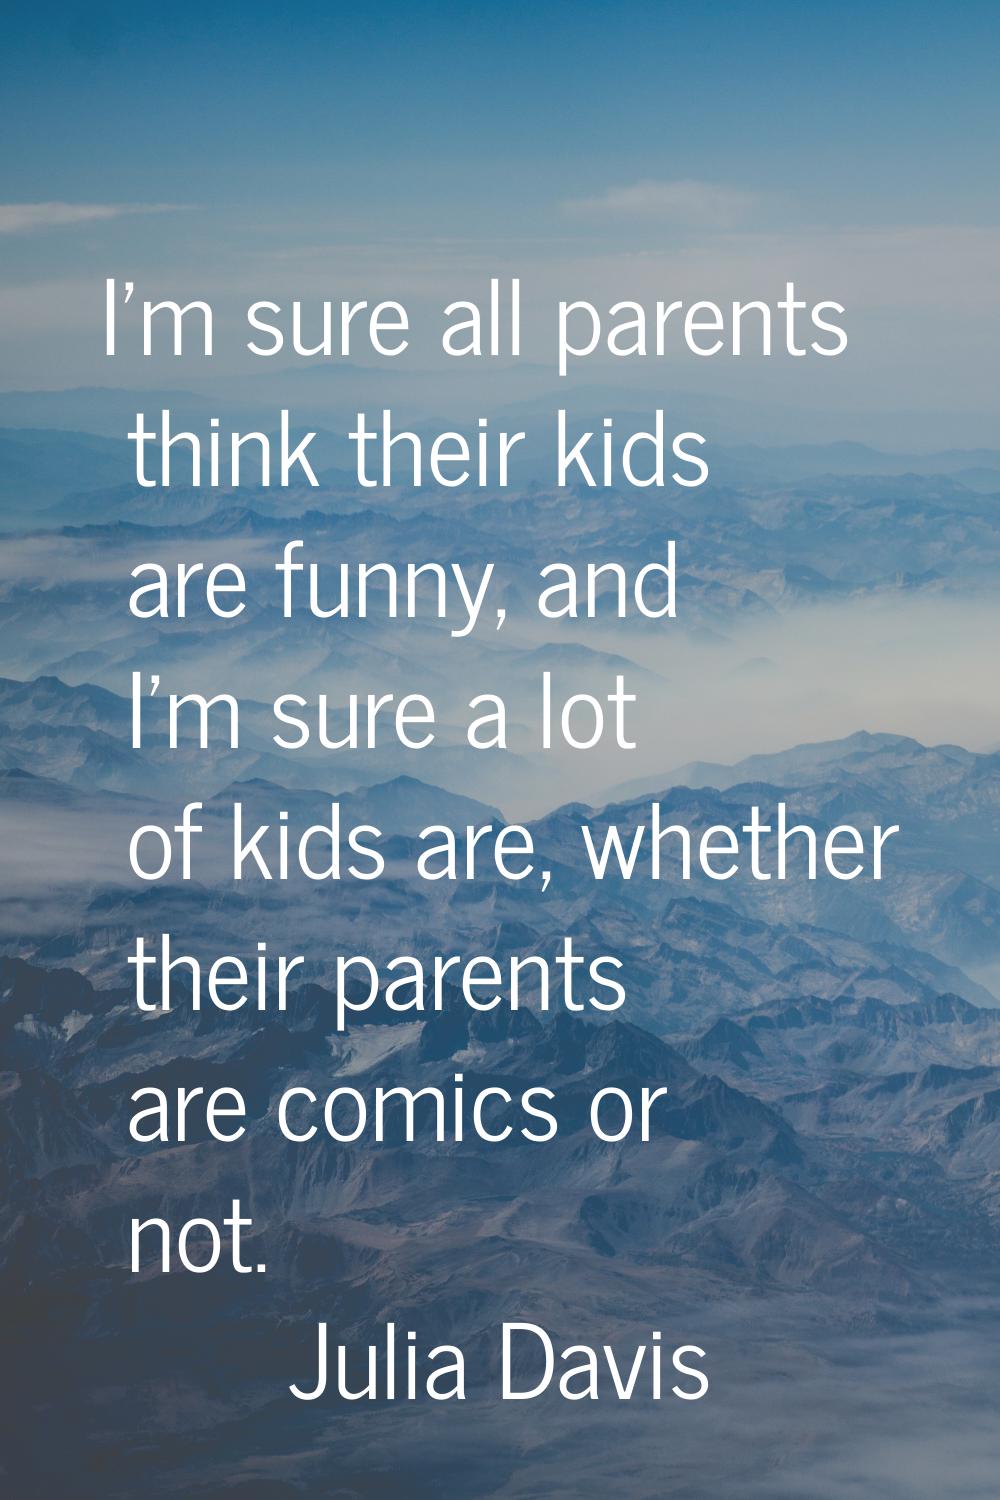 I'm sure all parents think their kids are funny, and I'm sure a lot of kids are, whether their pare